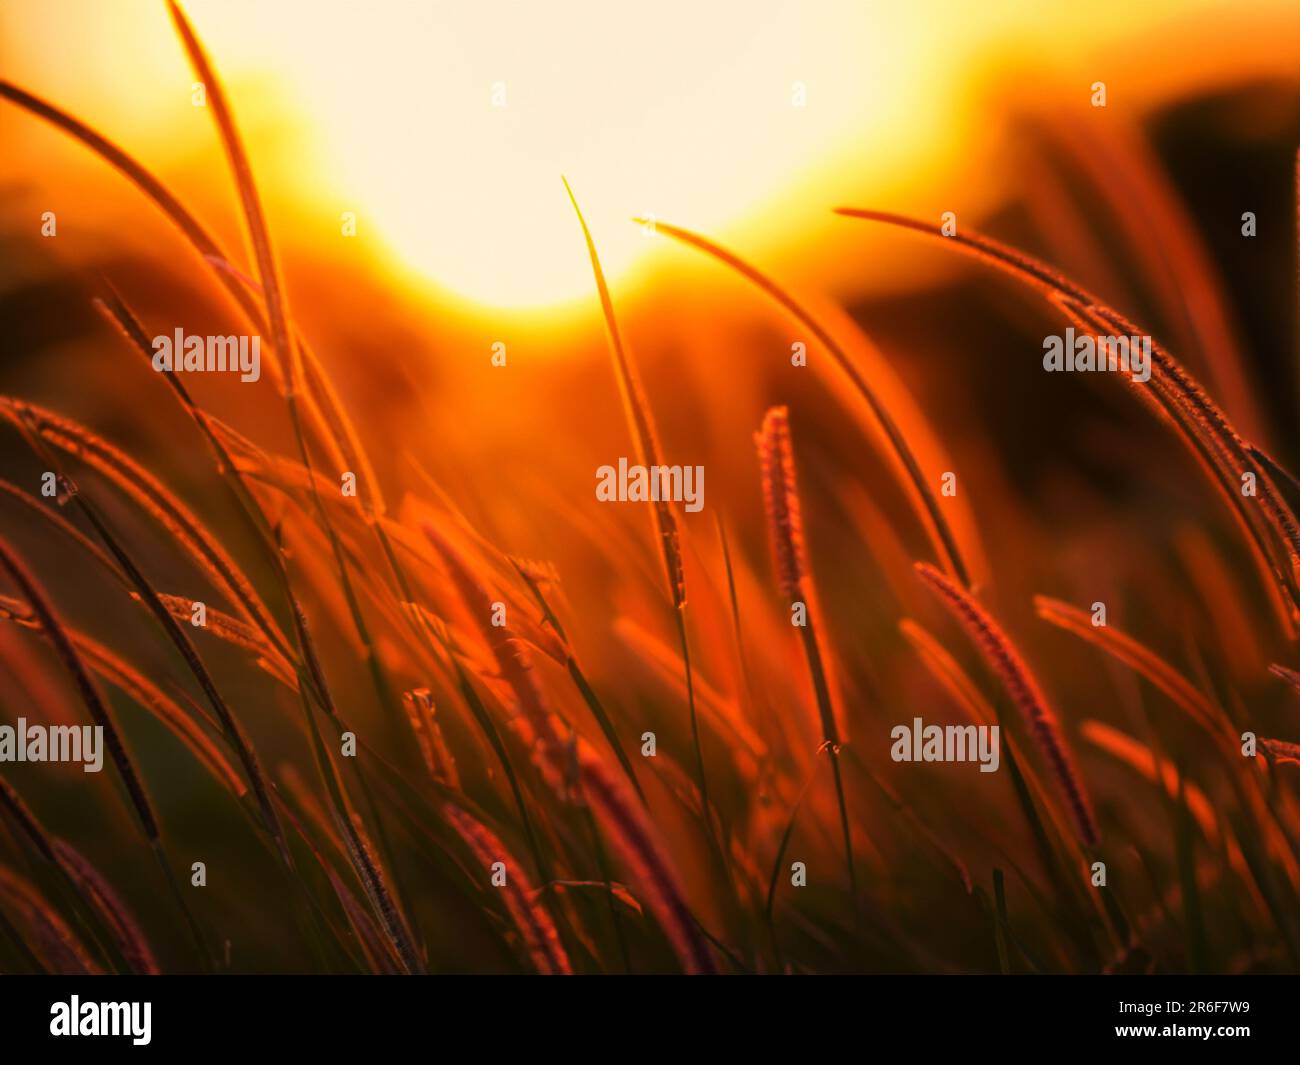 the sun is setting over a field of tall grass in the foreground. . Stock Photo